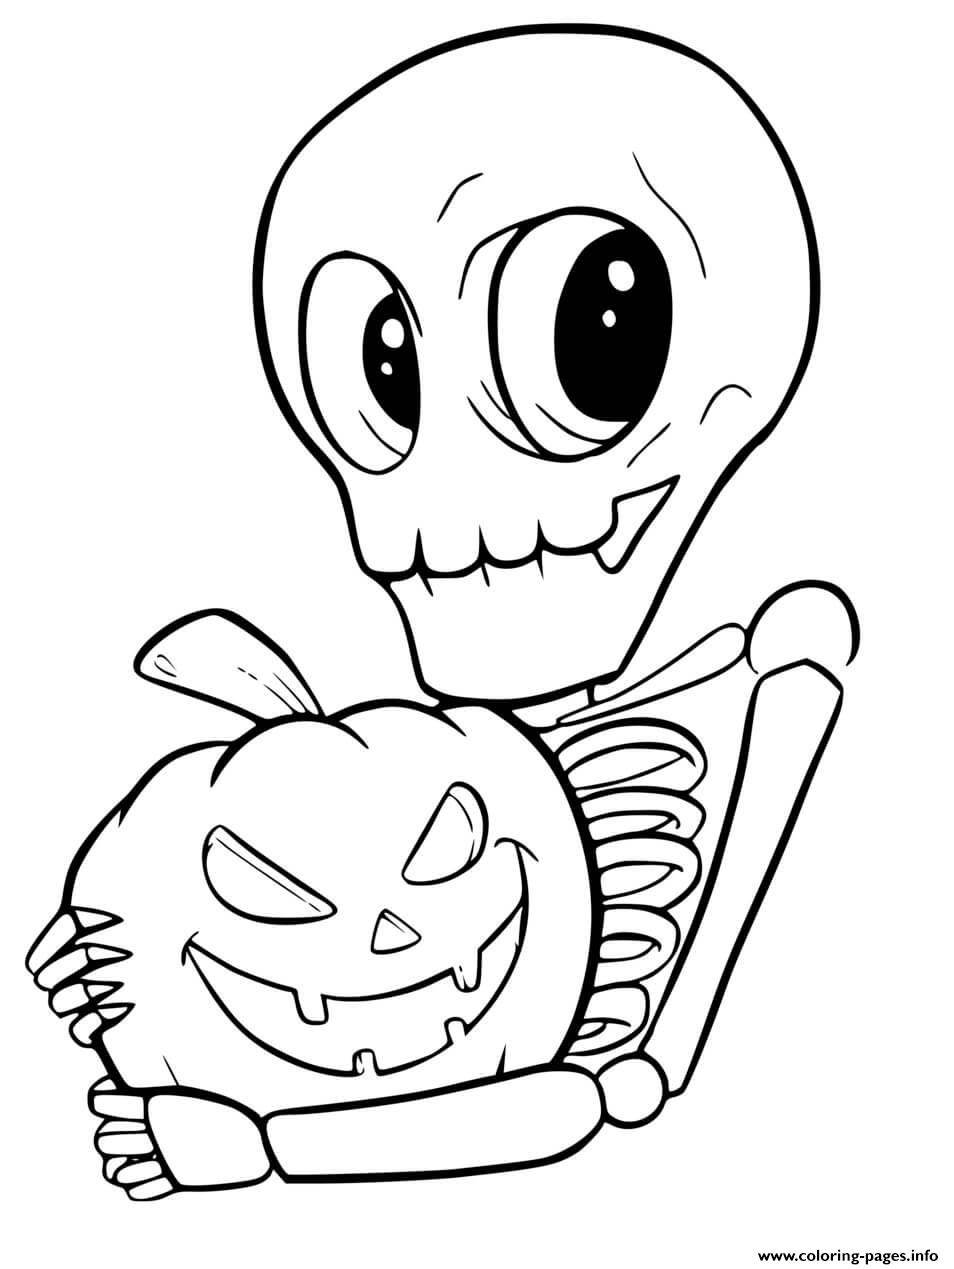 Cute Skeleton And Pumpkin For Halloween coloring